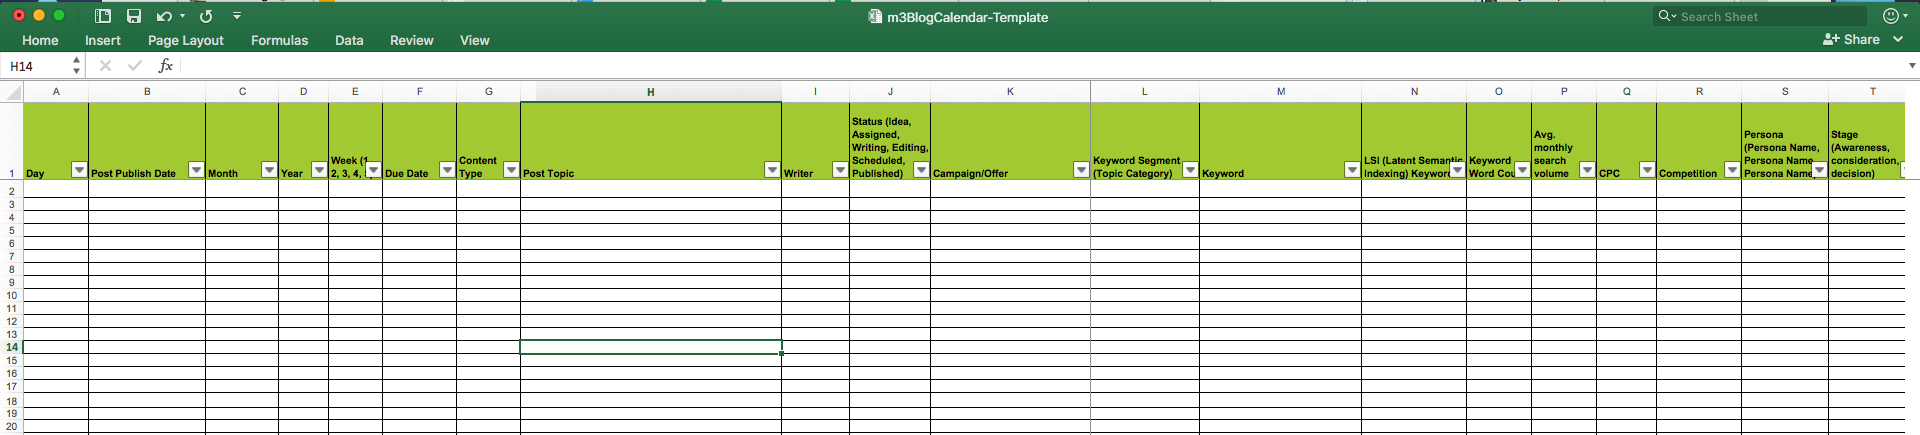 Editorial Calendar Spreadsheet With Editorial Calendar Templates For Content Marketing: The Ultimate List